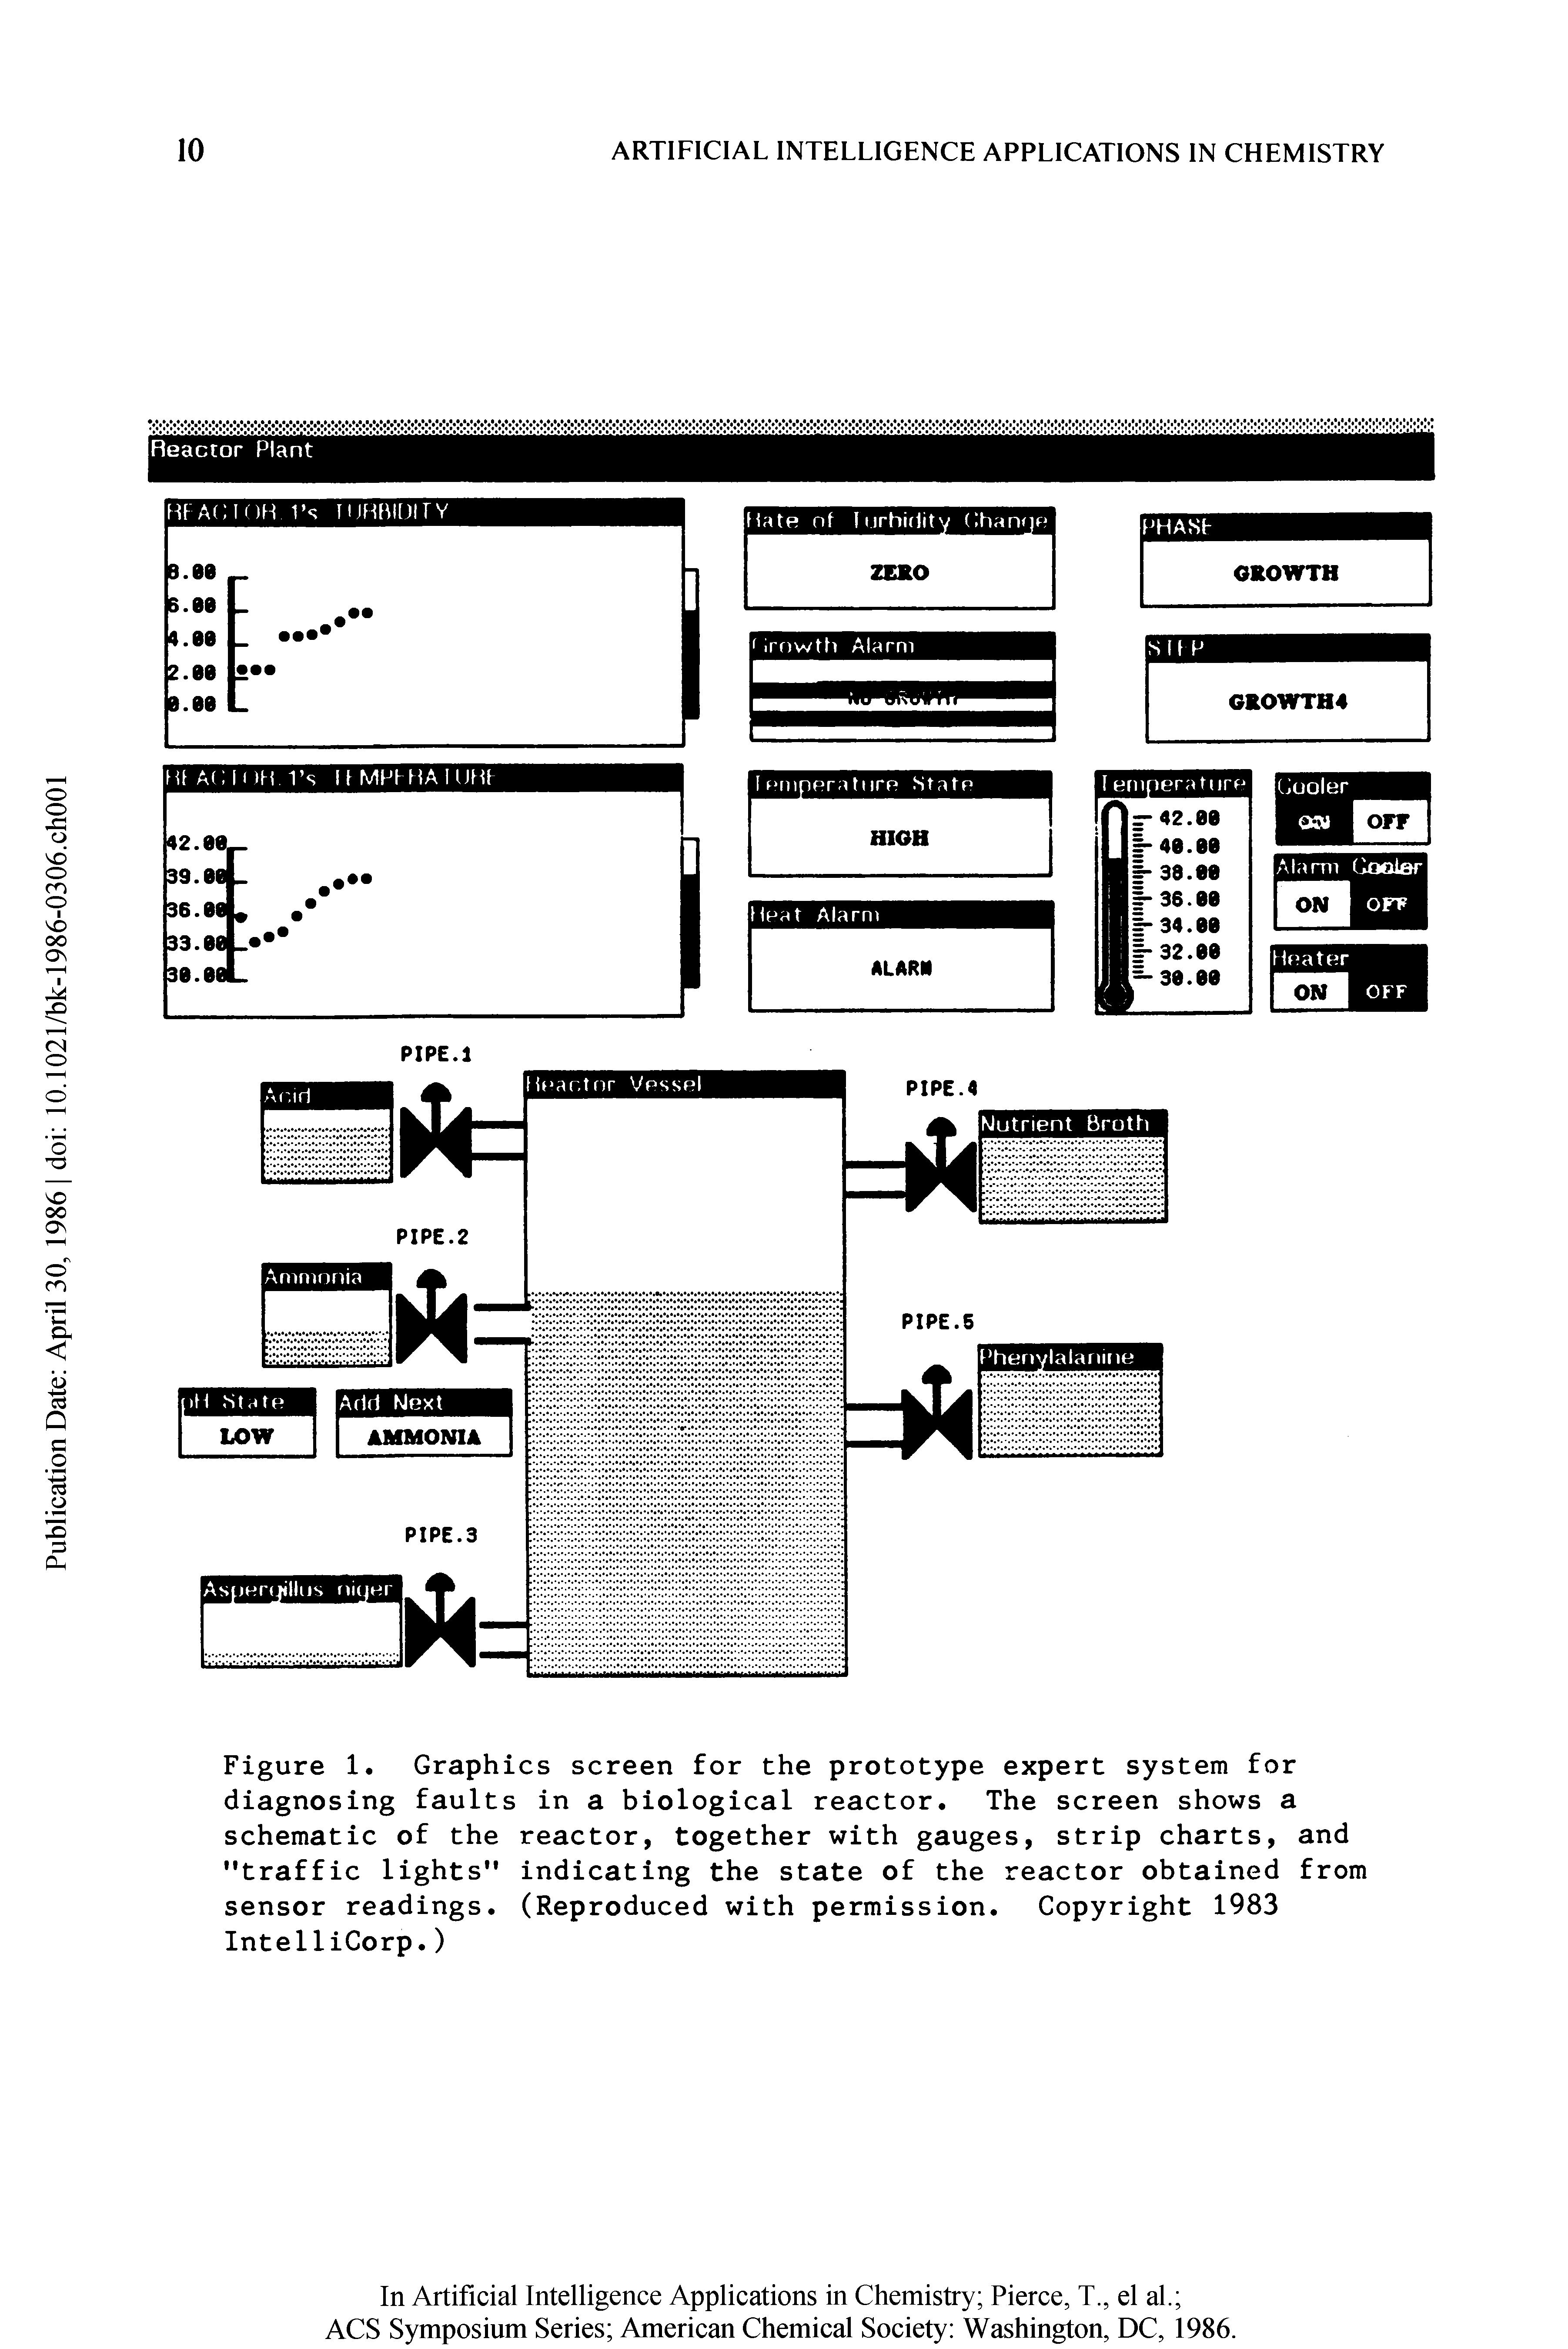 Figure 1. Graphics screen for the prototype expert system for diagnosing faults in a biological reactor. The screen shows a schematic of the reactor, together with gauges, strip charts, and "traffic lights" indicating the state of the reactor obtained from sensor readings. (Reproduced with permission. Copyright 1983 IntelliCorp.)...